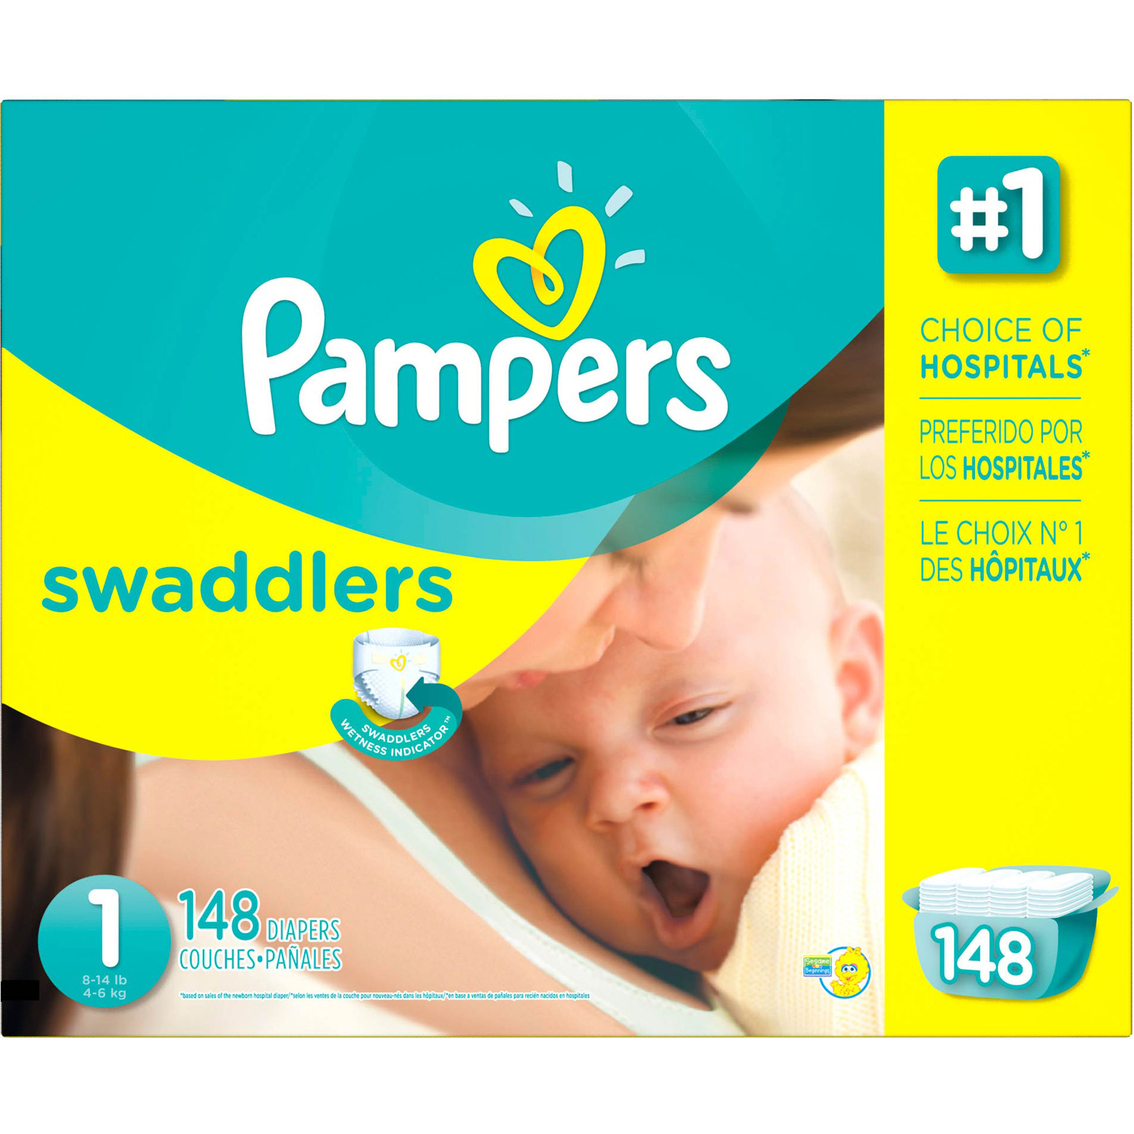 1 diapers